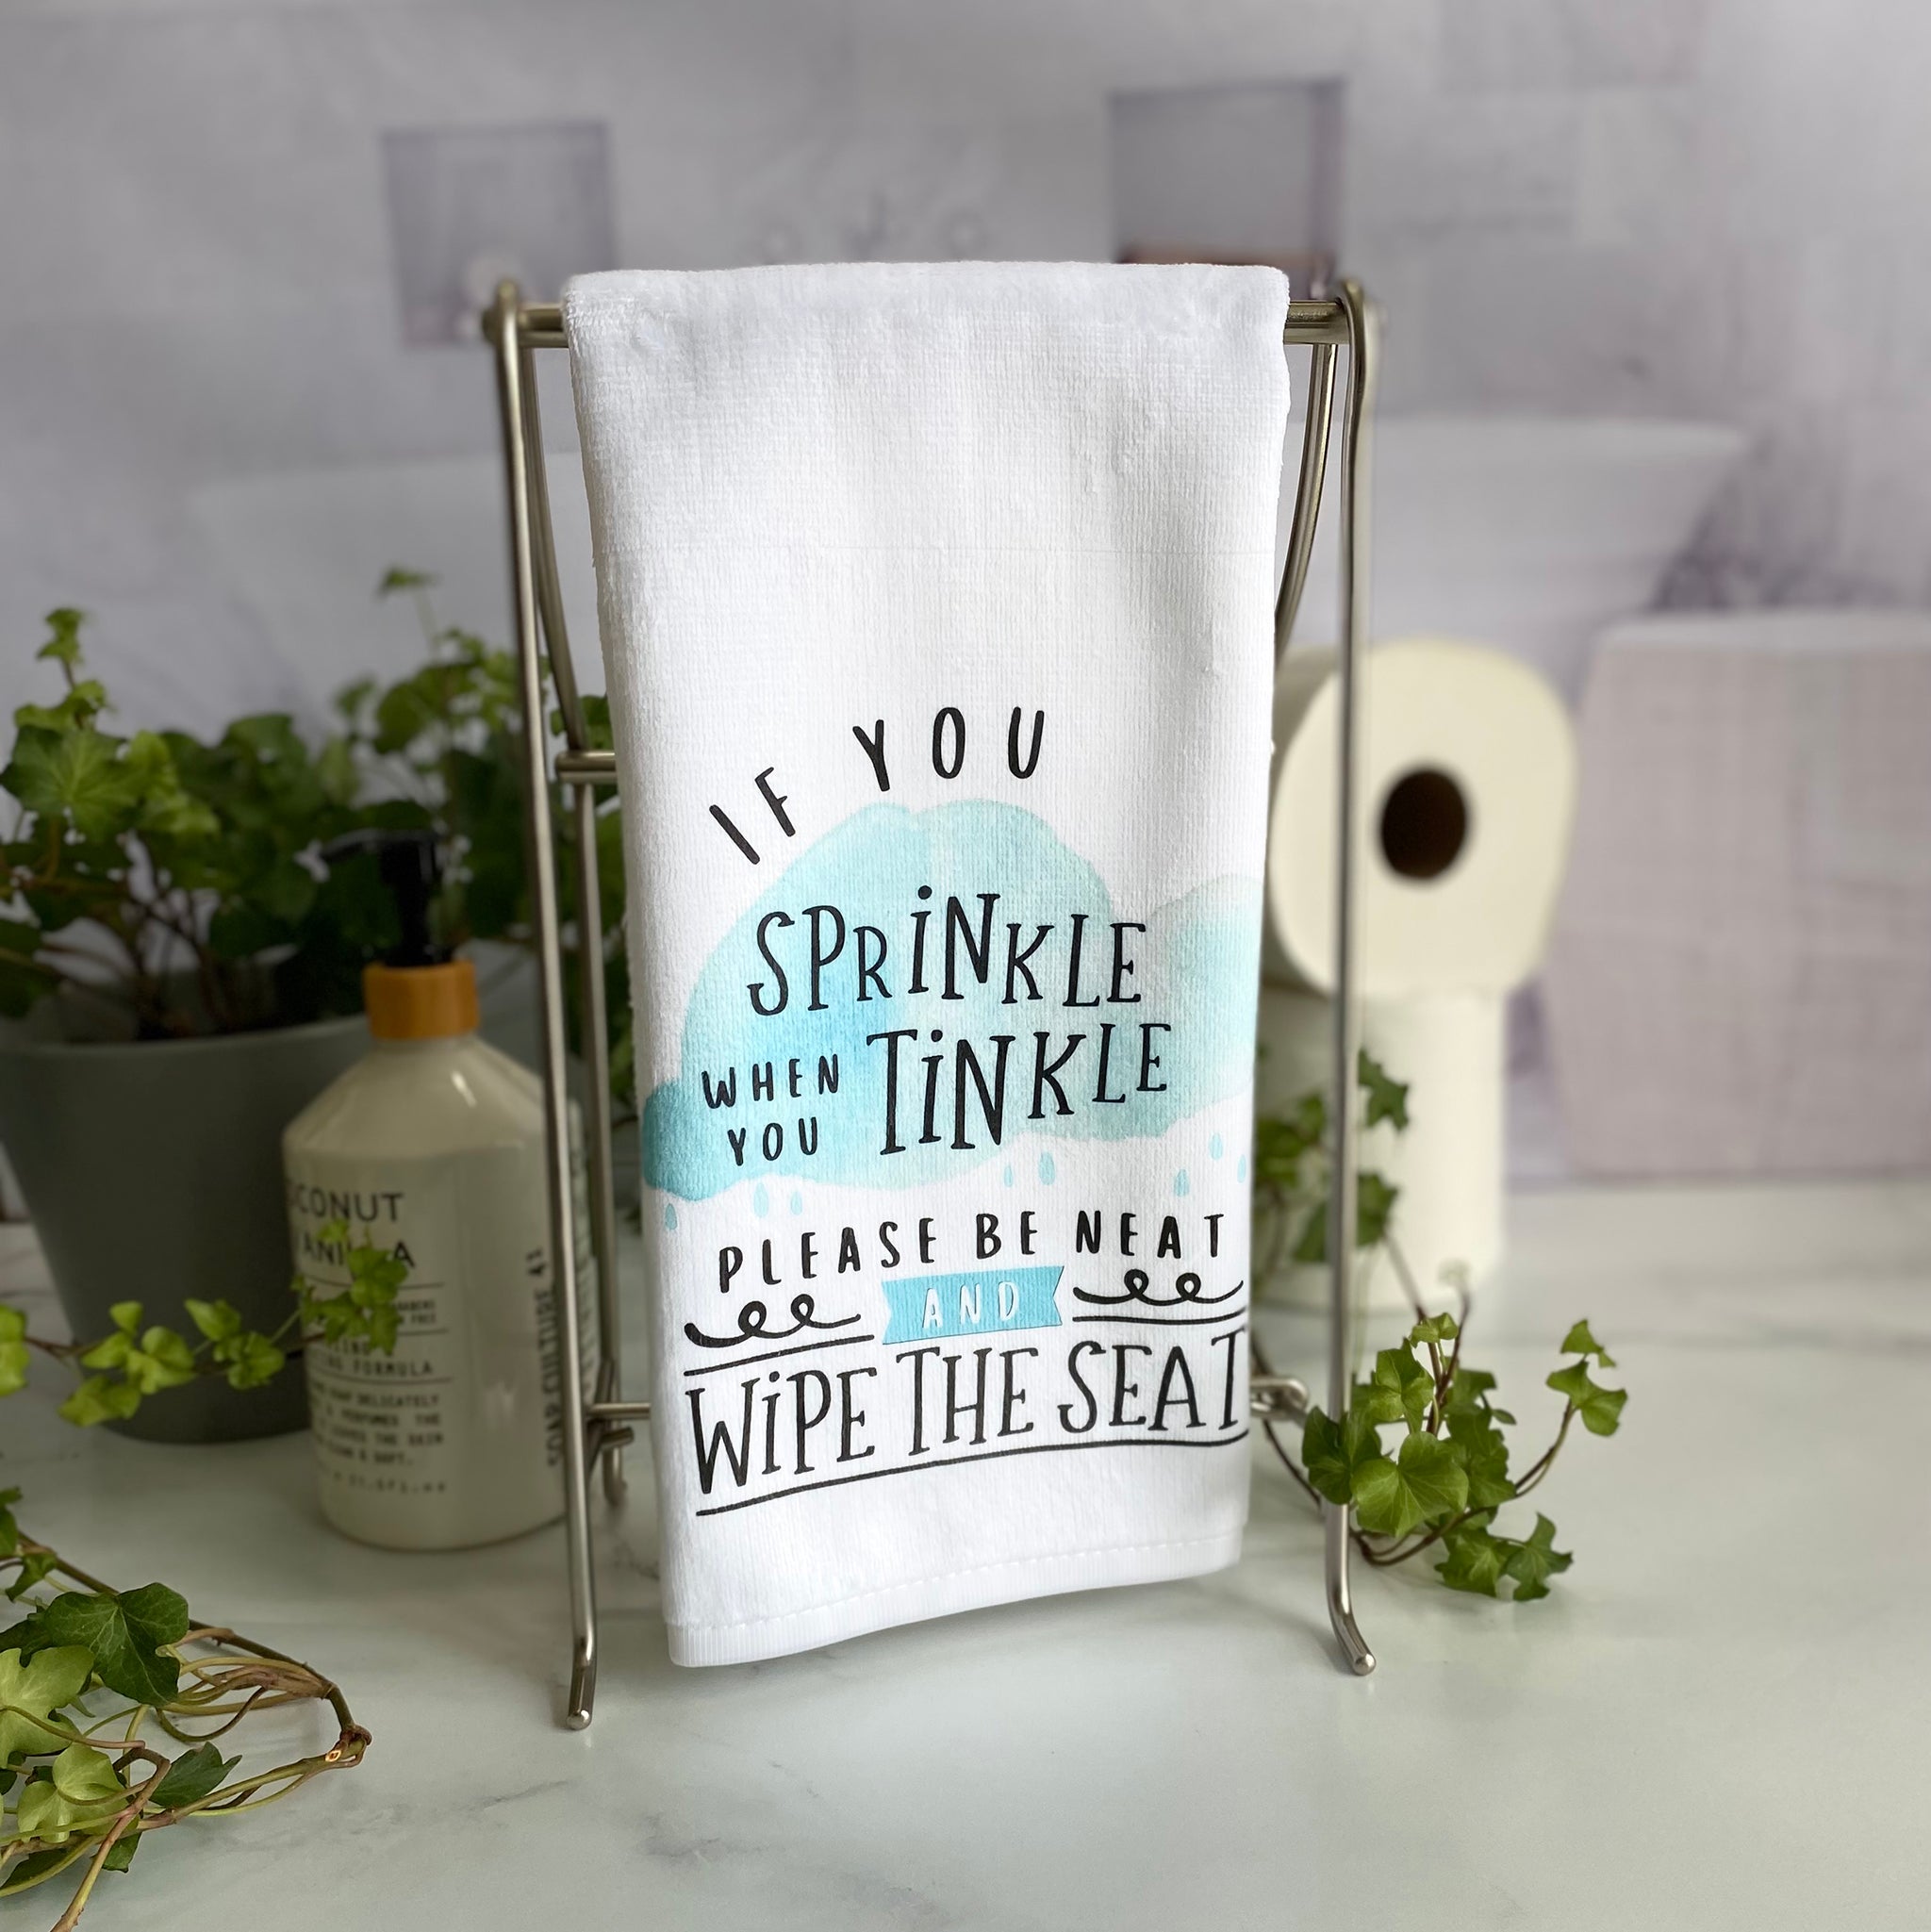 If You Sprinkle When You Tinkle - Funny Handtowel - Larissa Made This